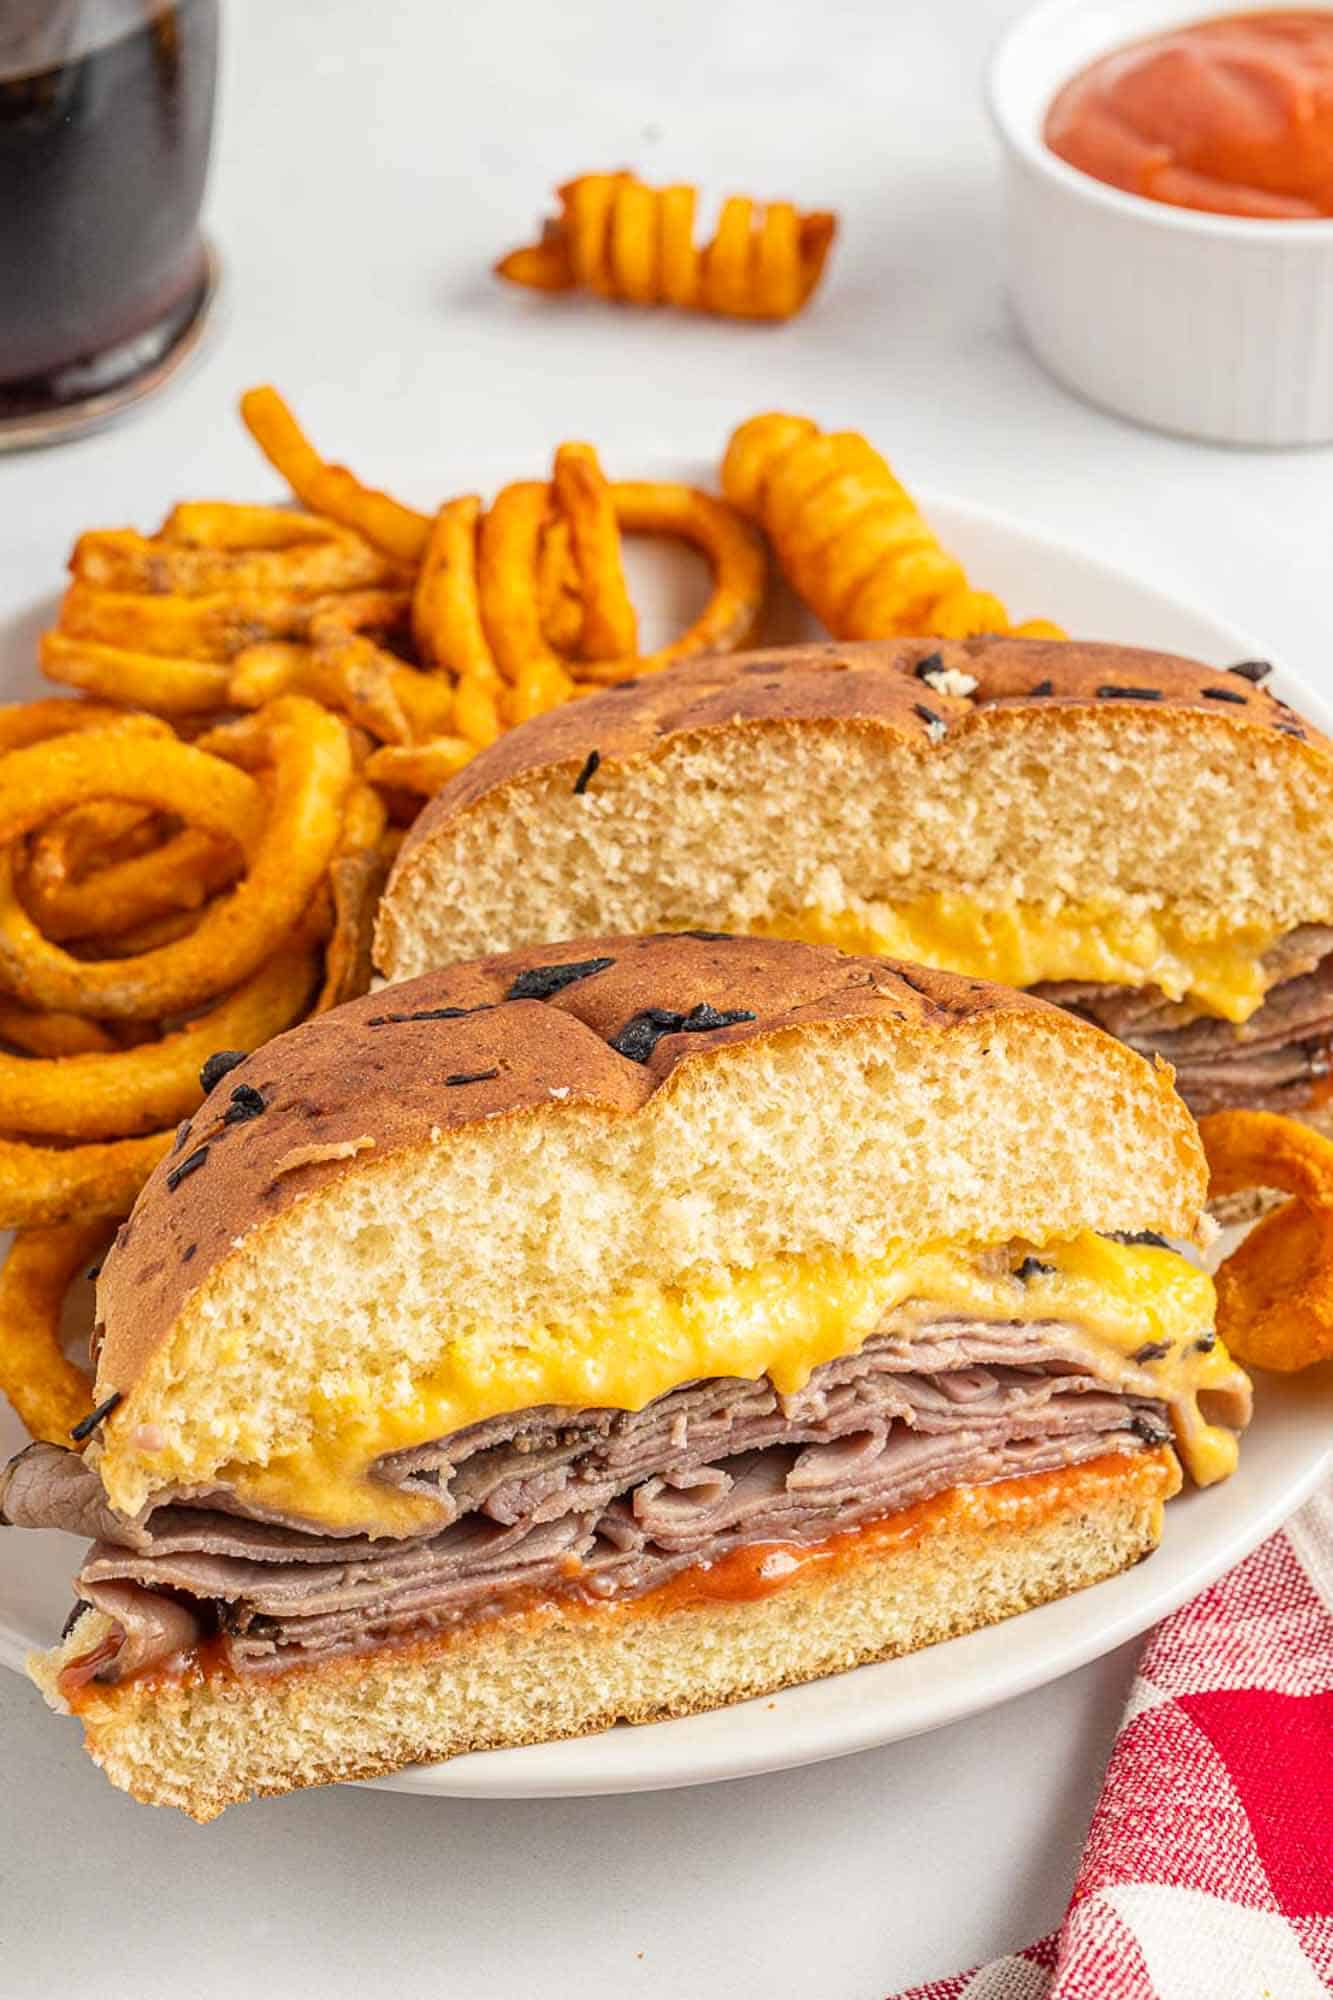 a copycat arby's sandwich cut in half on a plate with curly fries